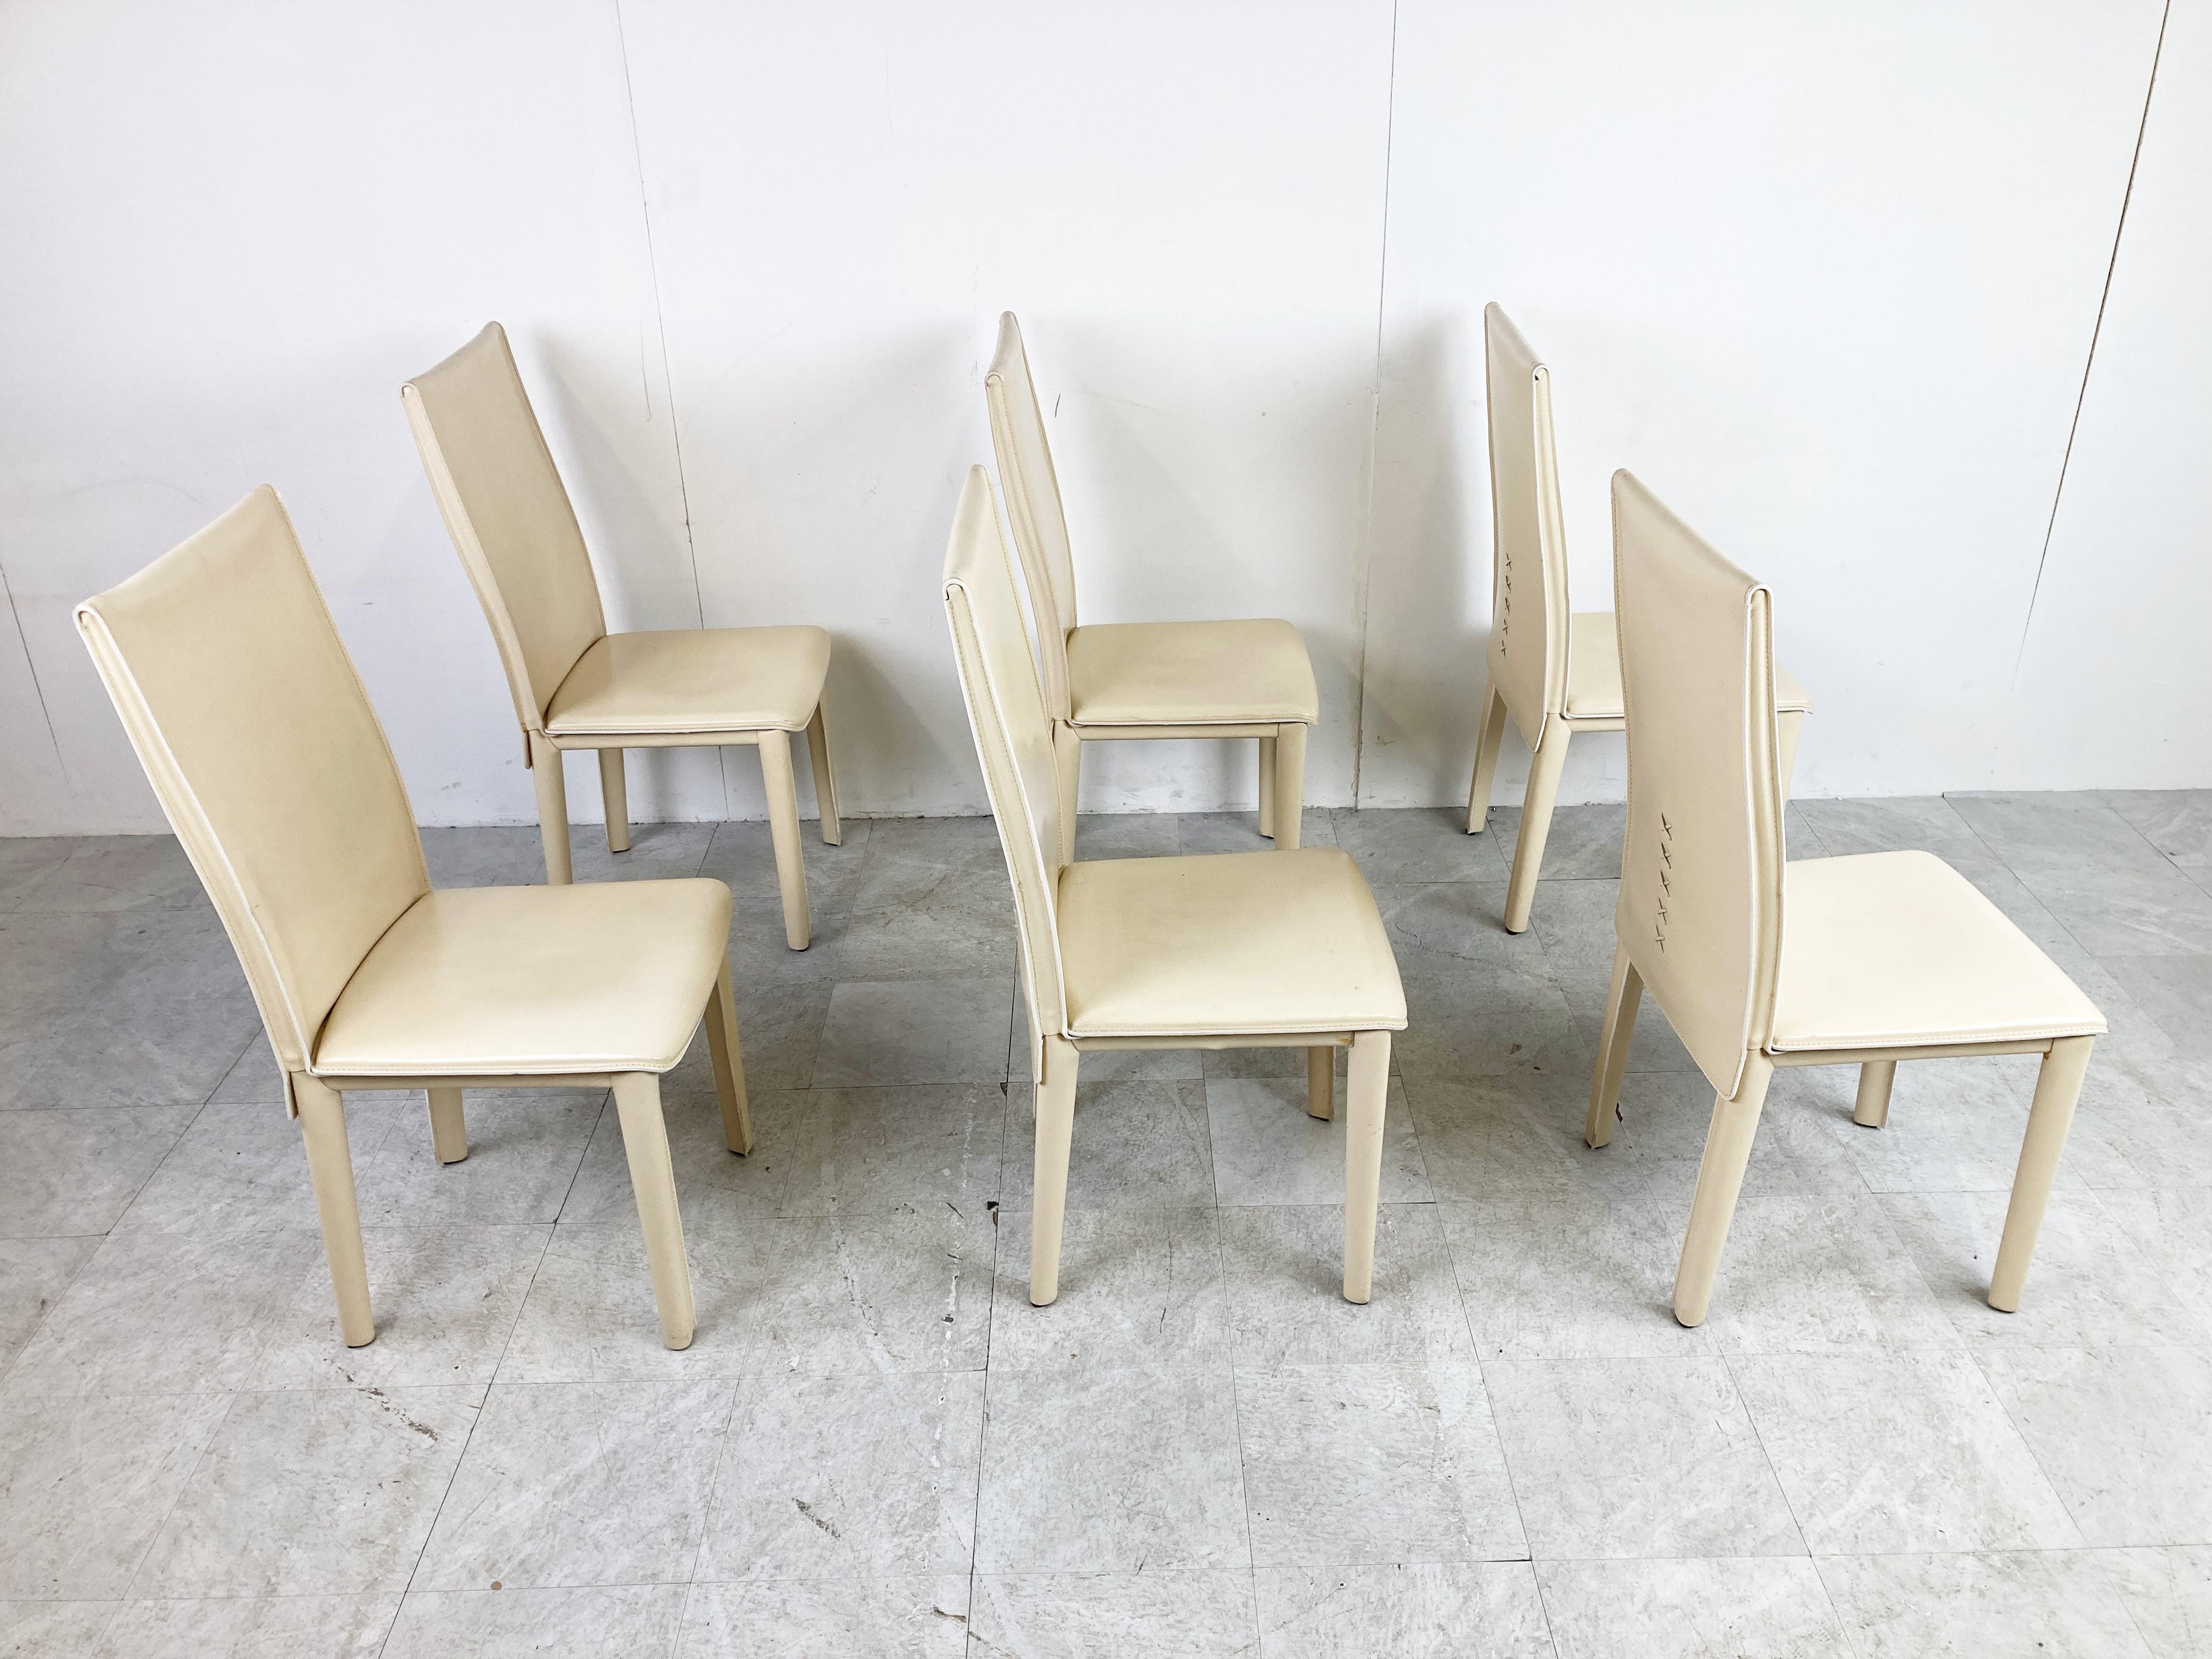 Vintage Dining Chairs by Arper Italy, 1980s For Sale 2